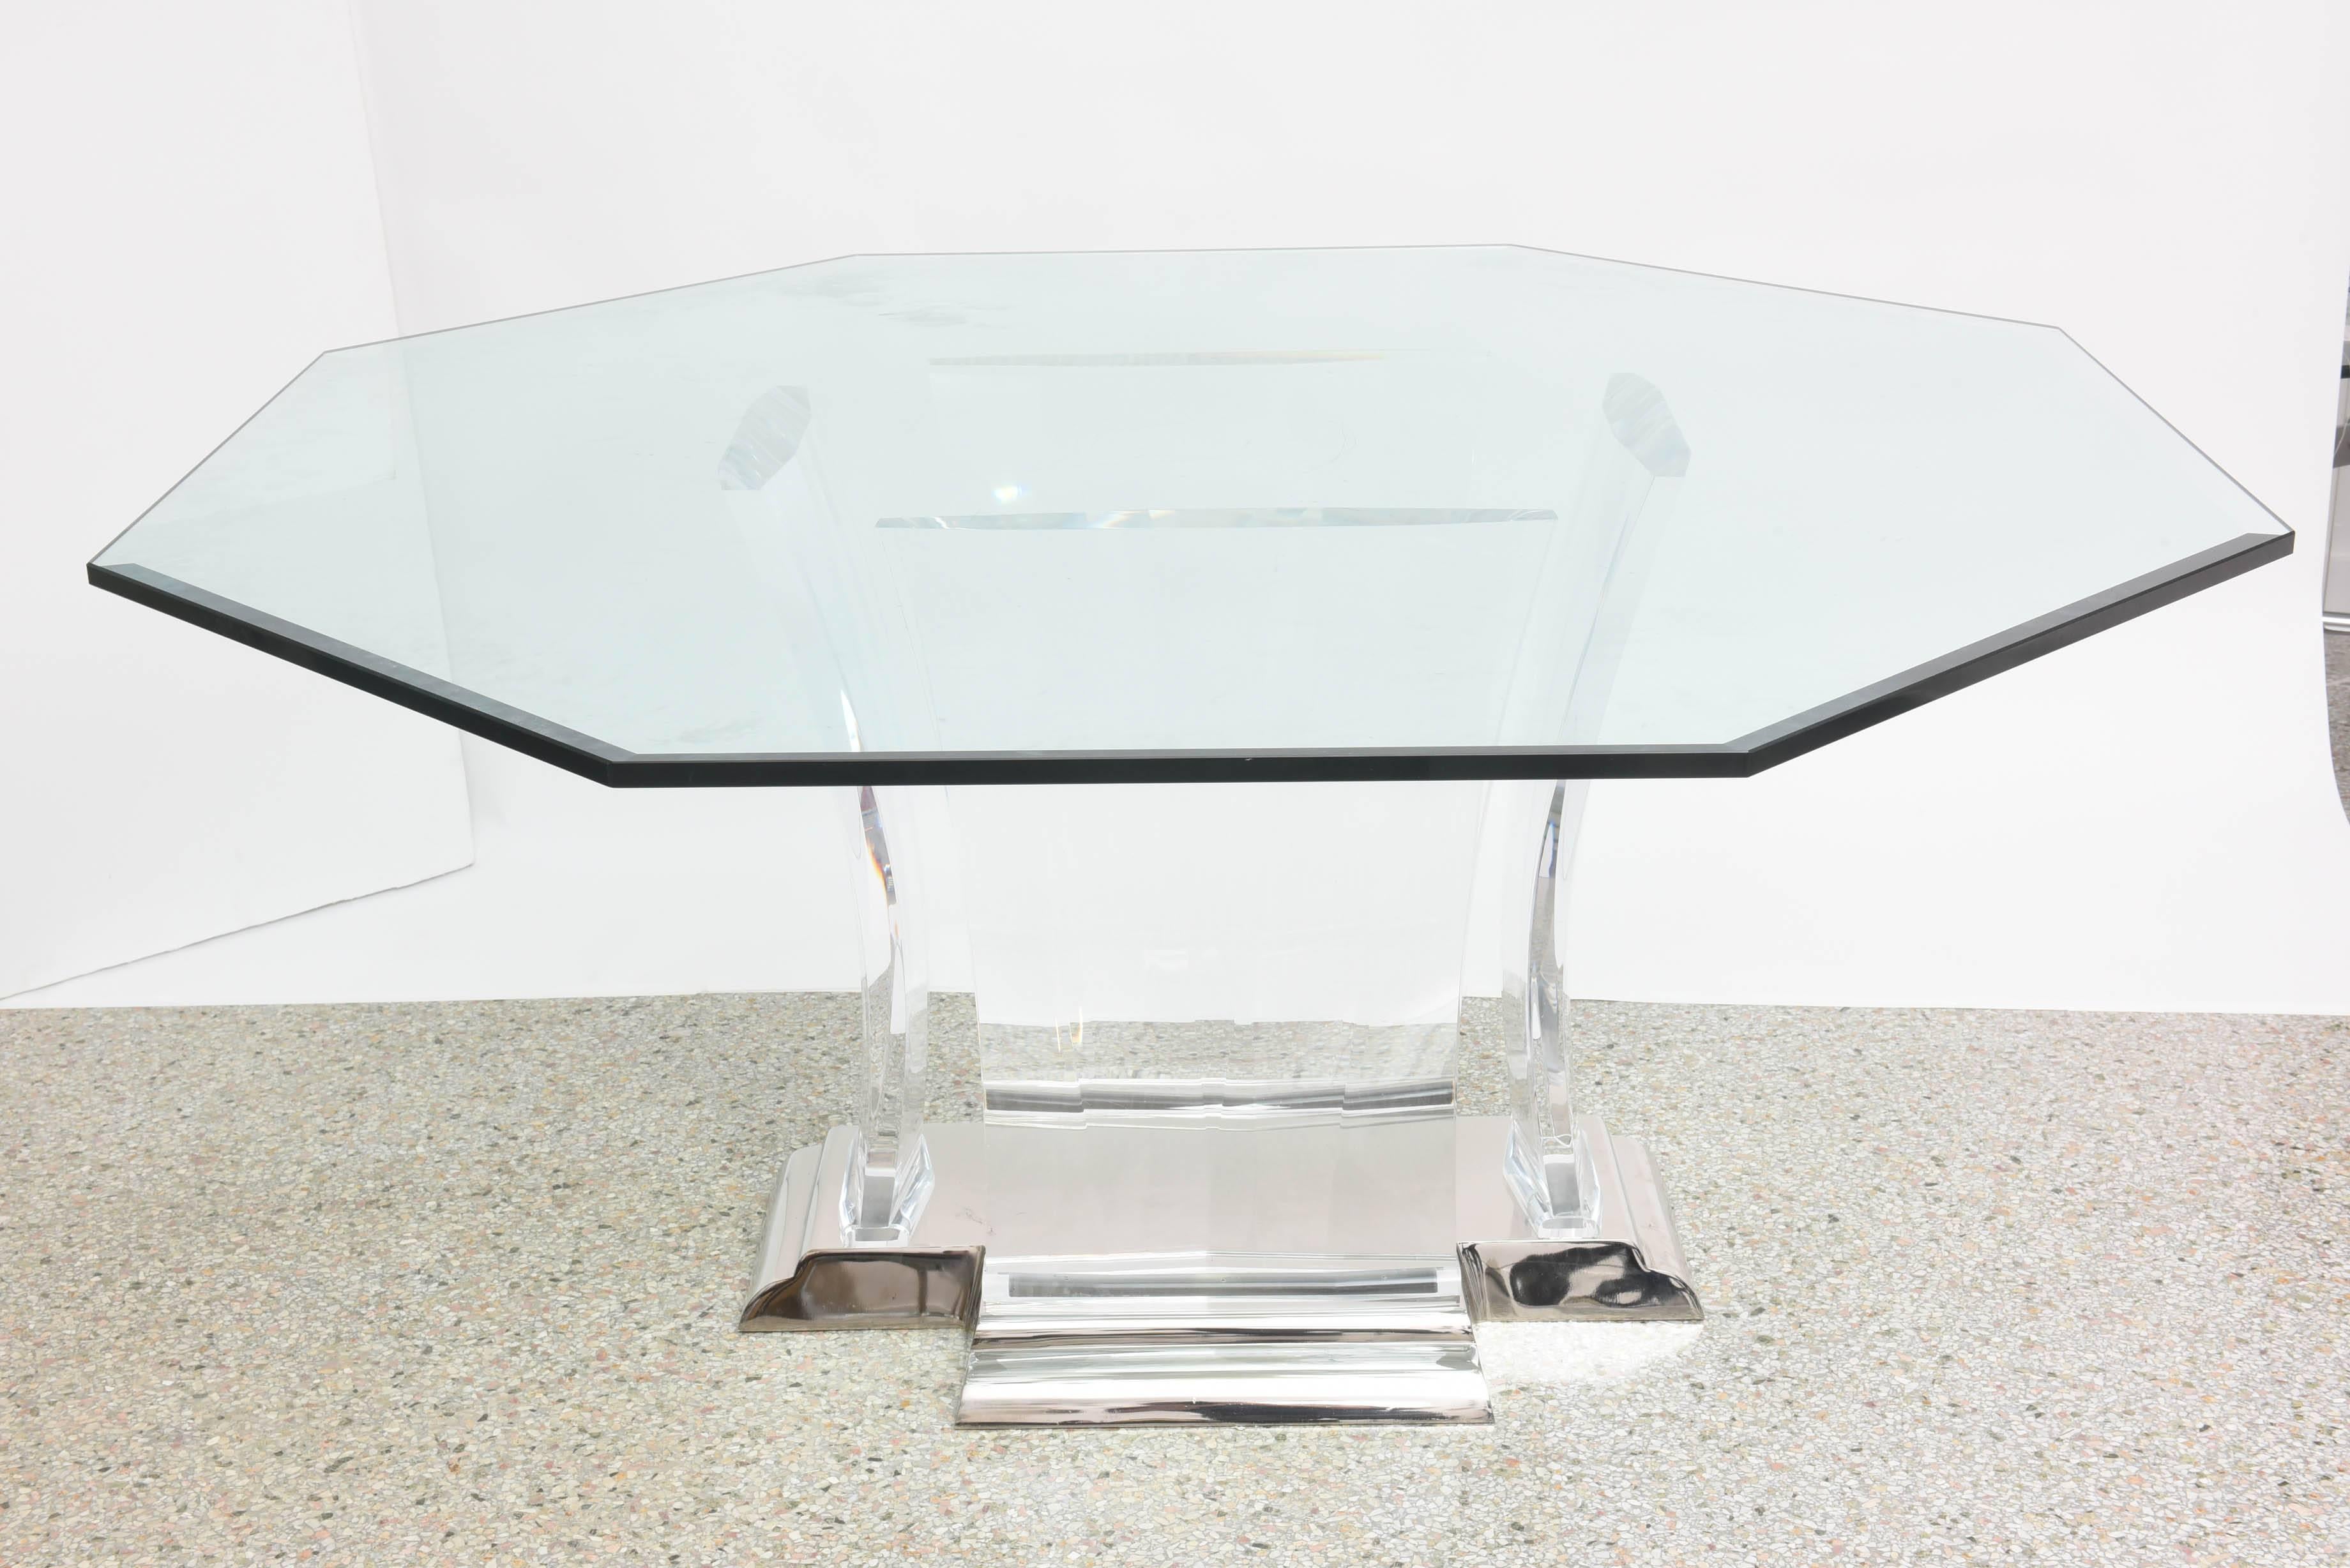 This handsome octagonal-shaped dining table was designed by the iconic firm of Spectrum Limited and was produced in the 1980s.

The base is nickel-plated with four 2" thick pieces of flared Lucite supports.

The glass top is 3/4" thick